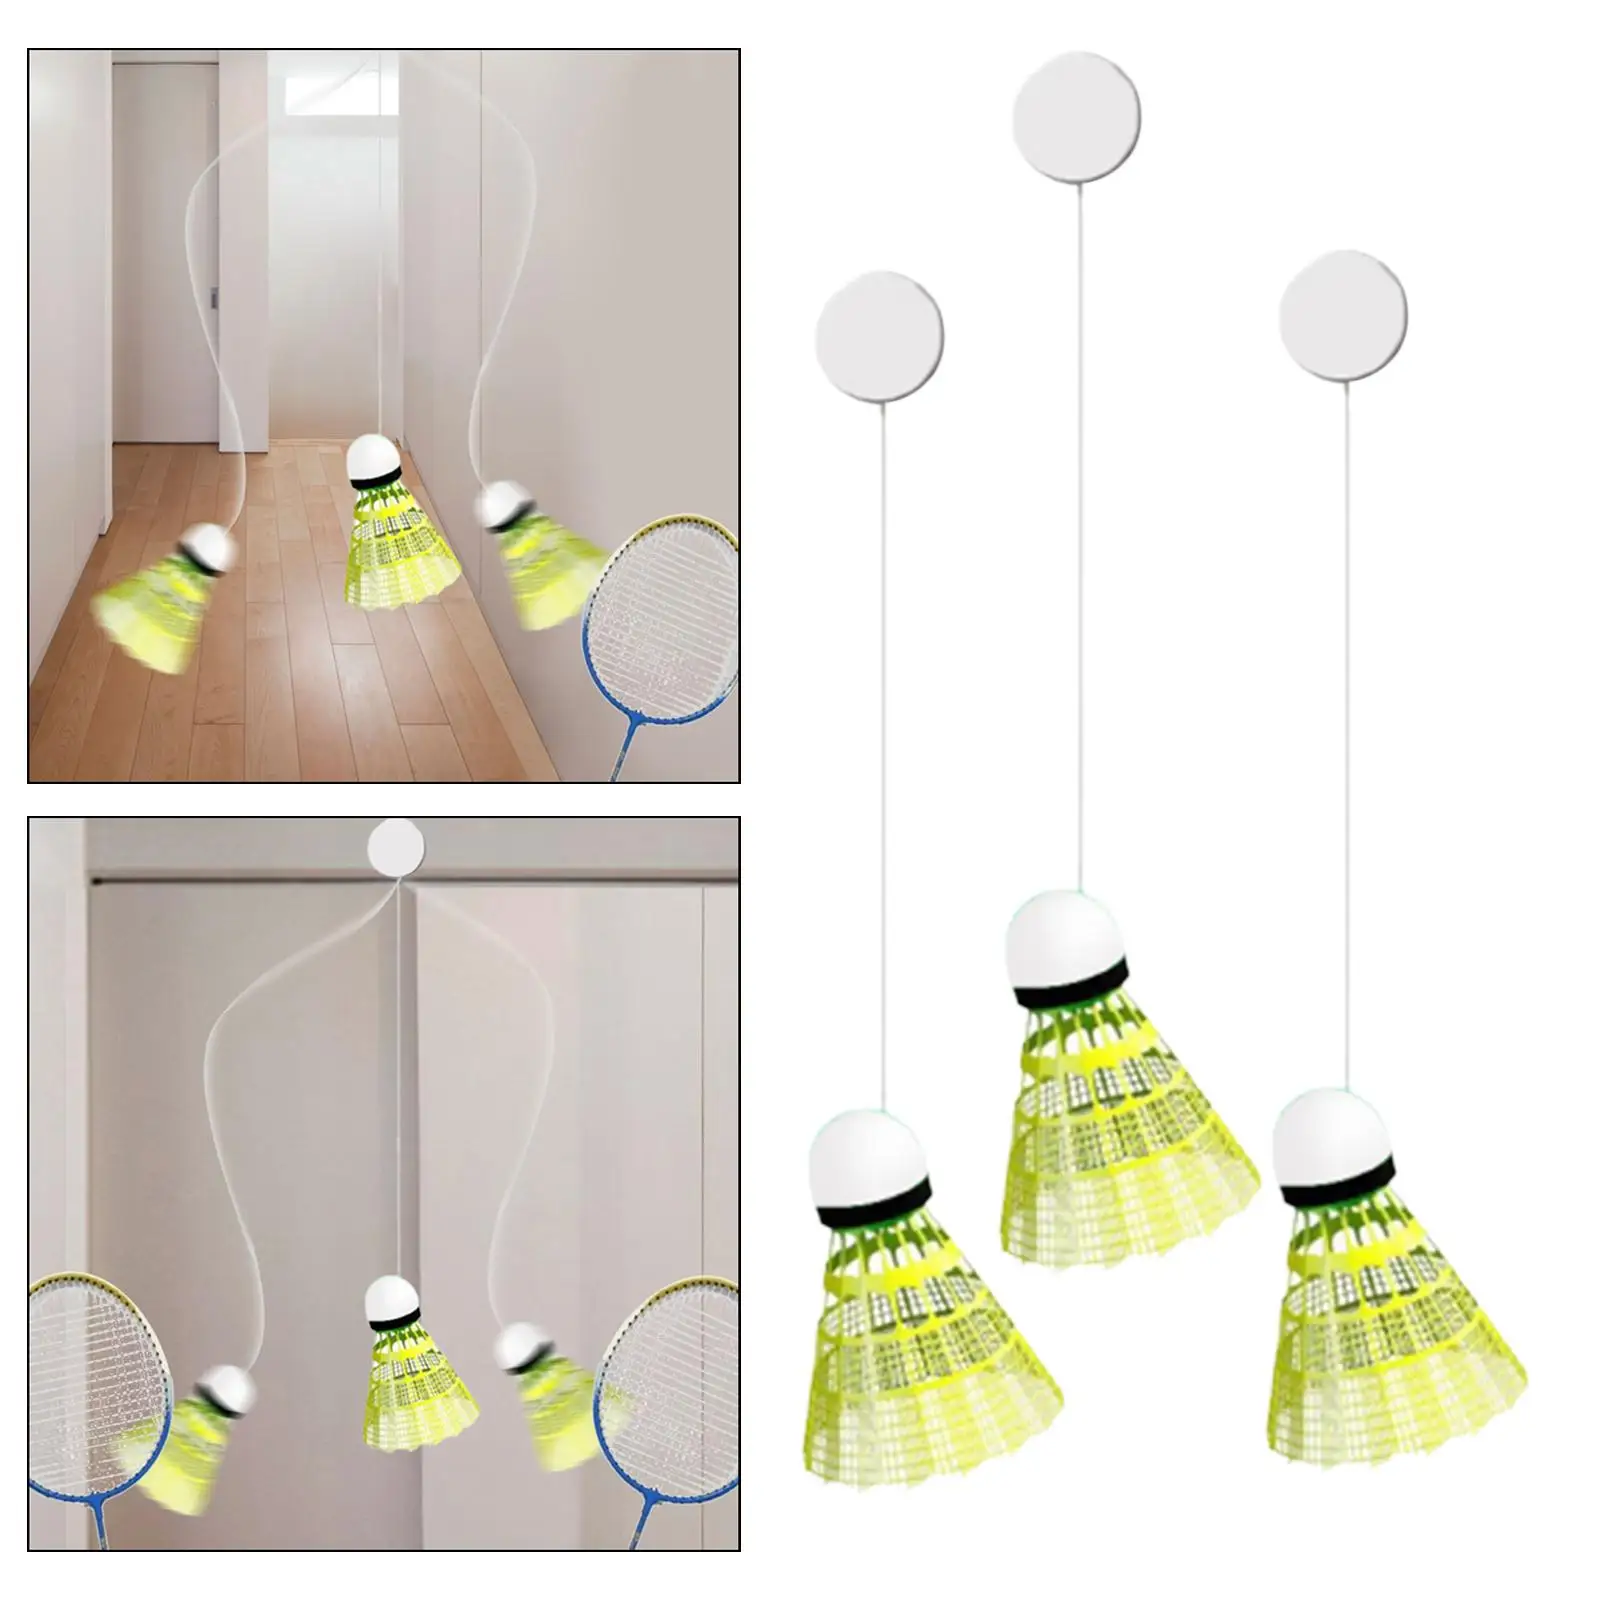 Badminton Solo Trainer Beginner Training Device Solo Practice Equipment Self Practice Trainer with Shuttlecock for Games Fitness